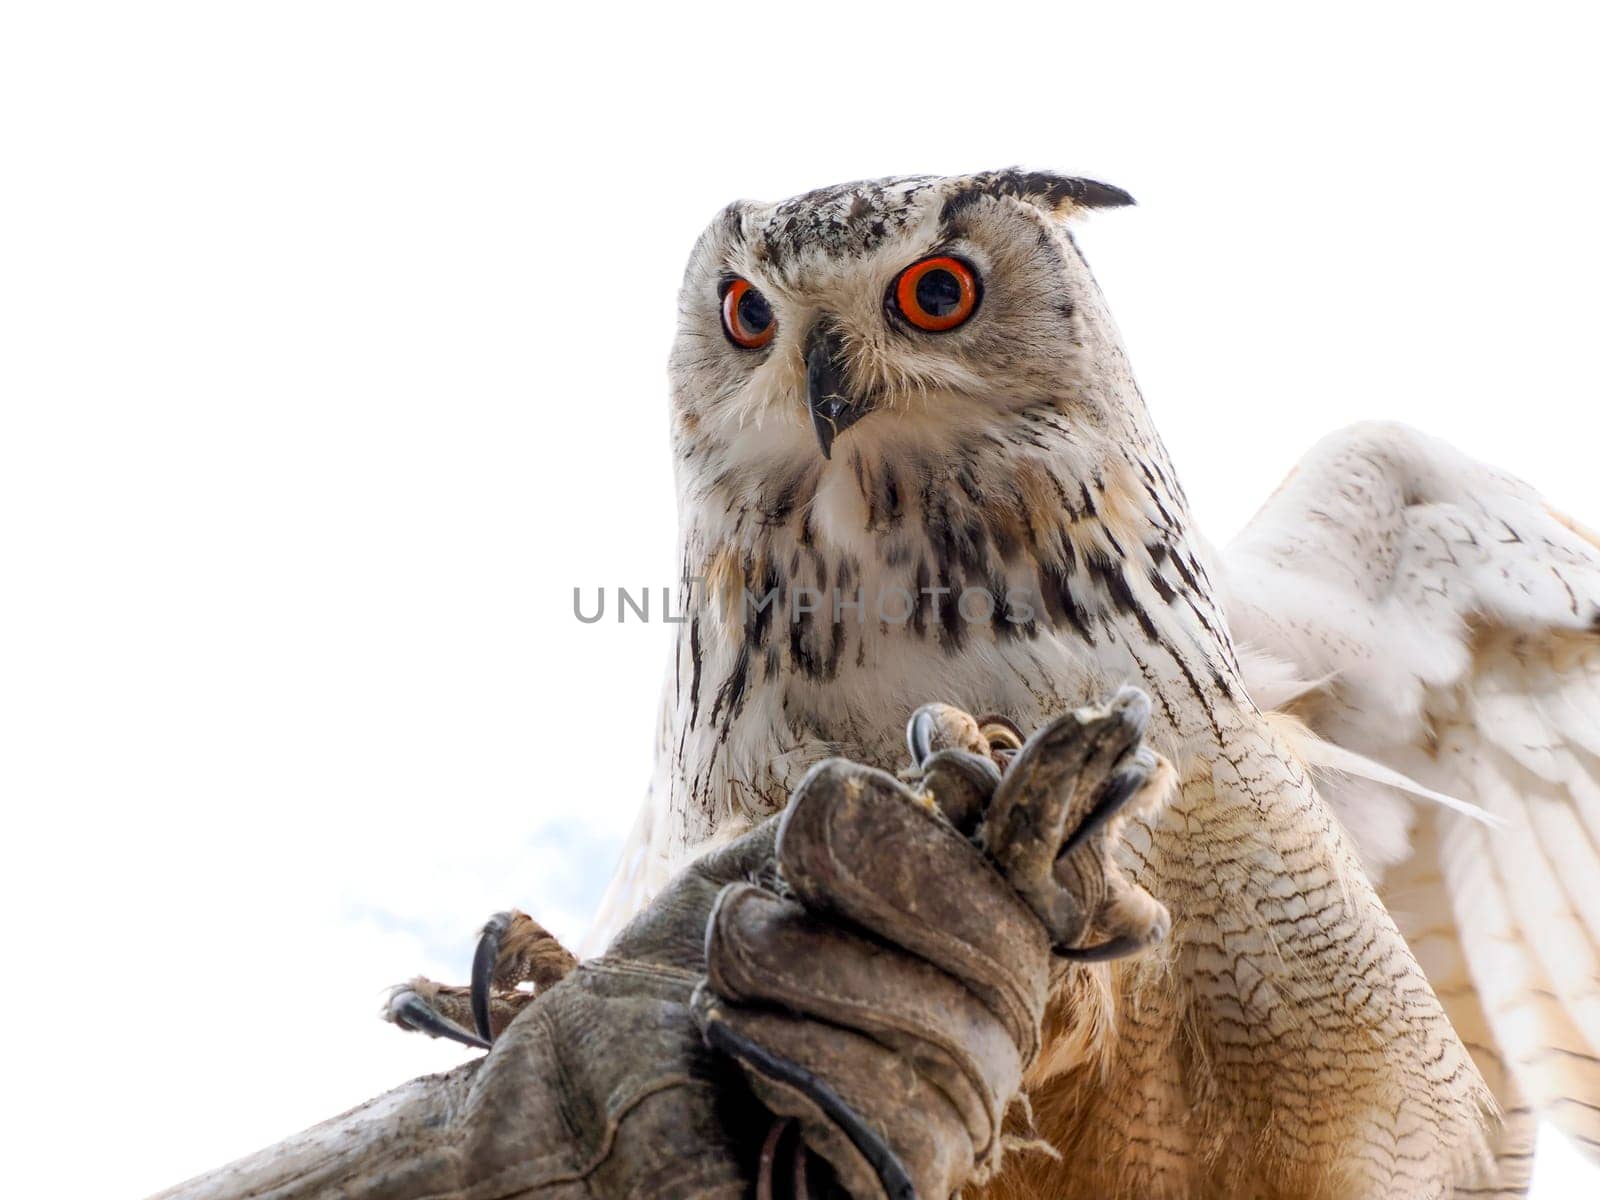 An open wings owl bird of prey close up portrait looking at you